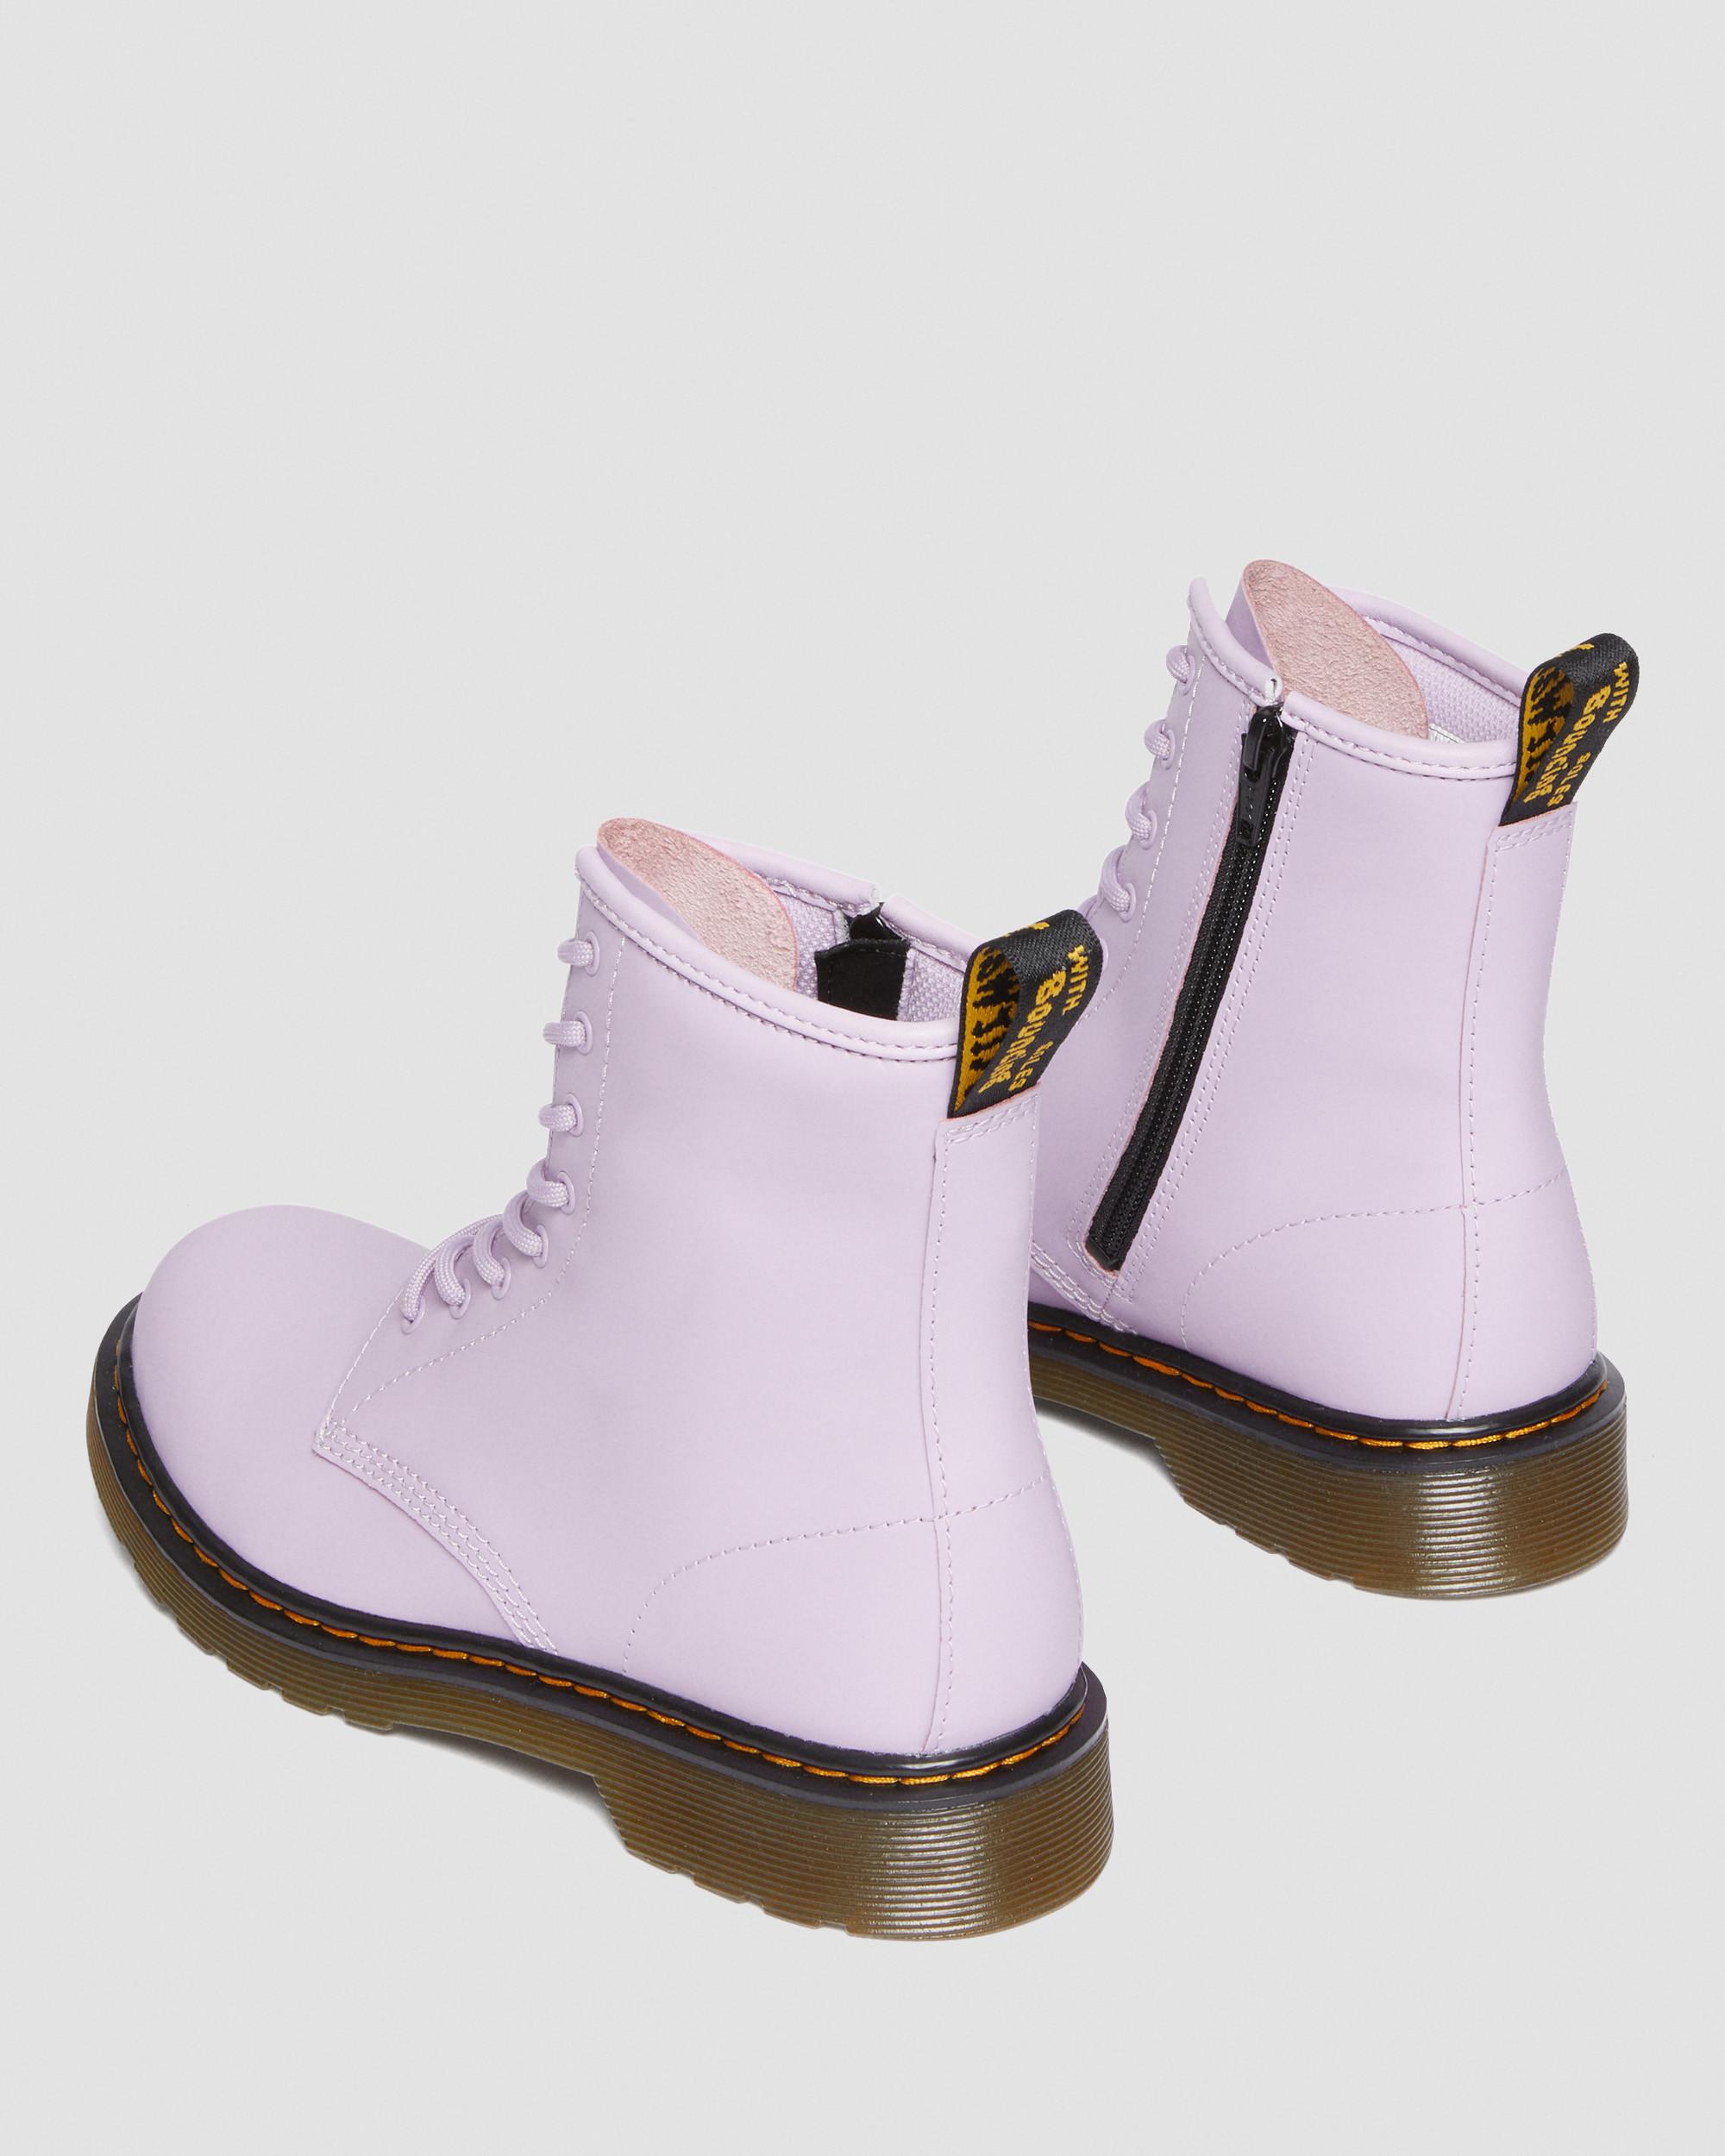 Romario Youth Boots Martens in Up Dr. Lilac | Lace Leather 1460